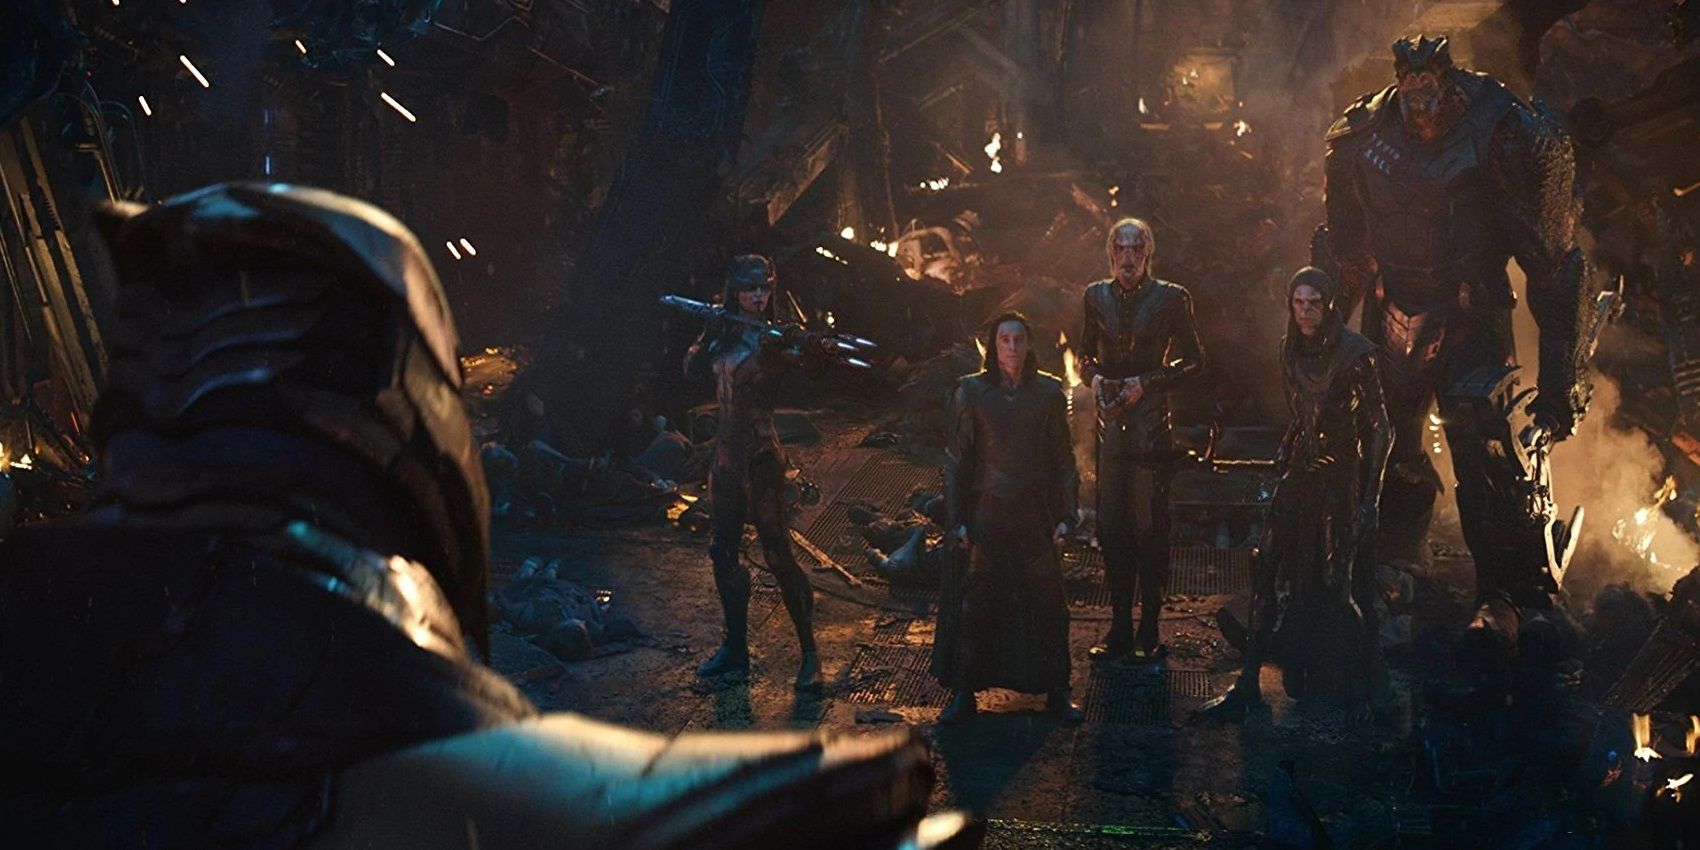 Thanos and his Black Order aboard the Asgardian ship in Infinity War